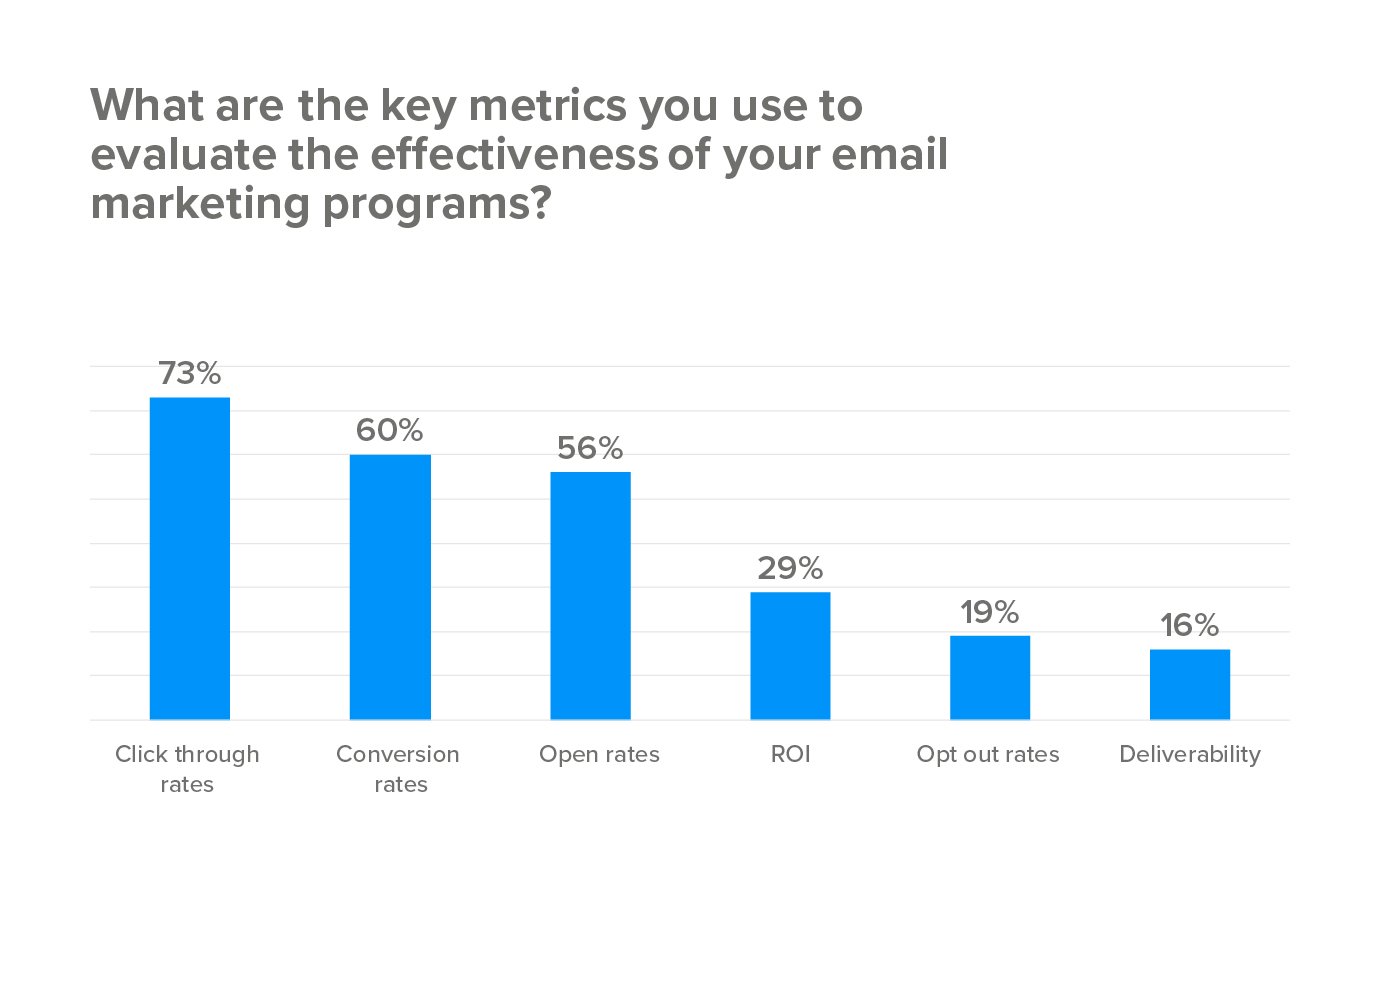 What are the key metrics you use to evaluate the effectiveness of your email marketing programs?